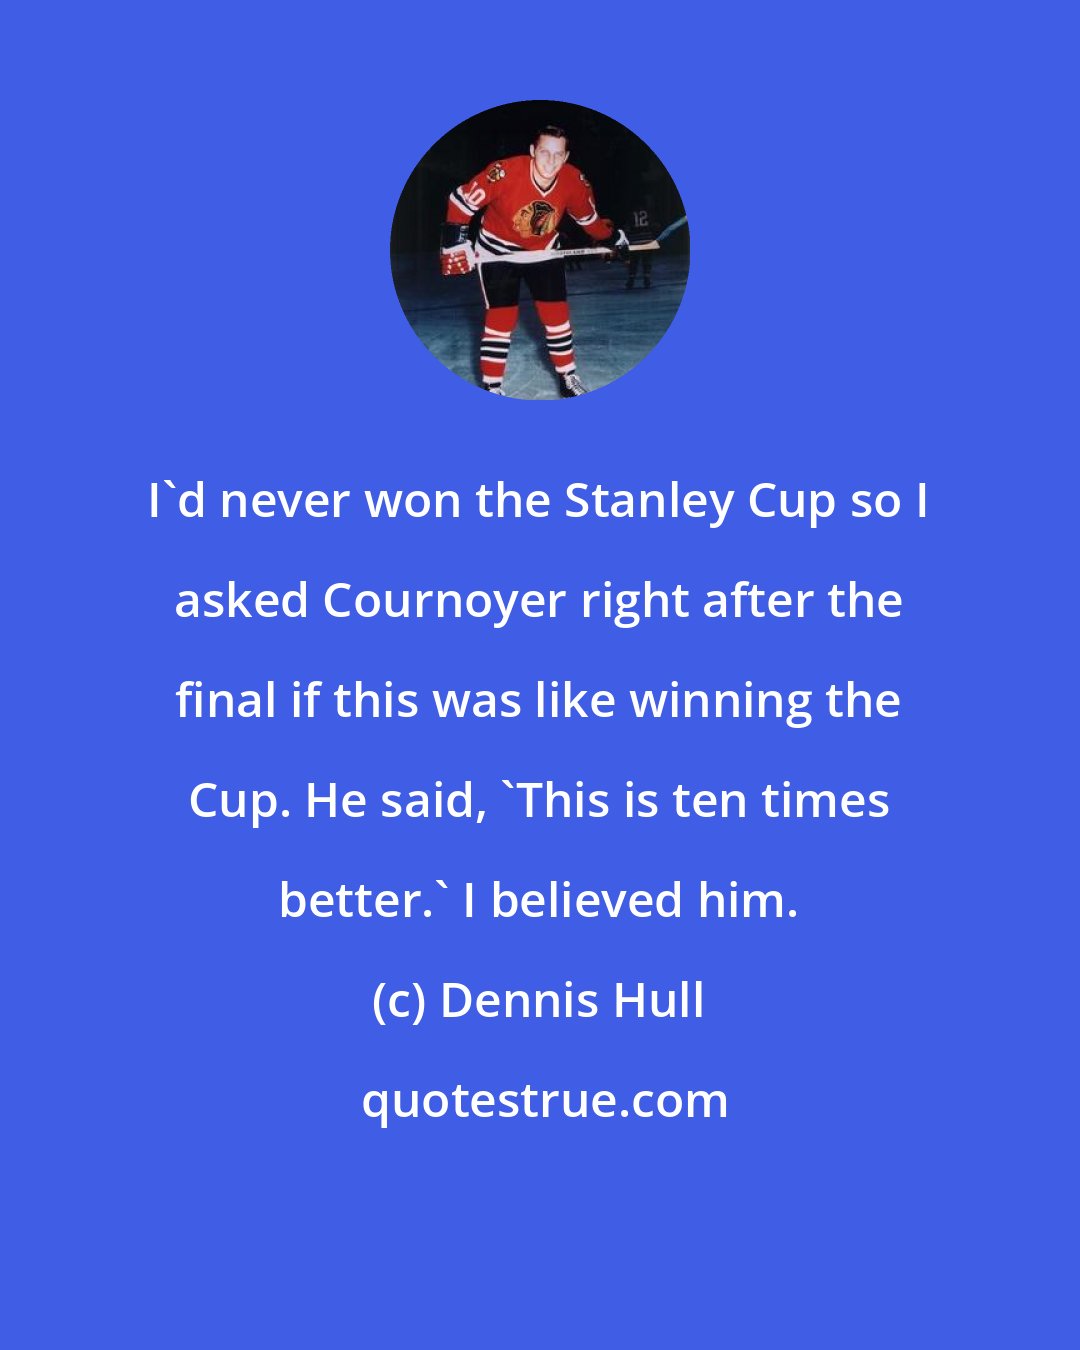 Dennis Hull: I'd never won the Stanley Cup so I asked Cournoyer right after the final if this was like winning the Cup. He said, 'This is ten times better.' I believed him.